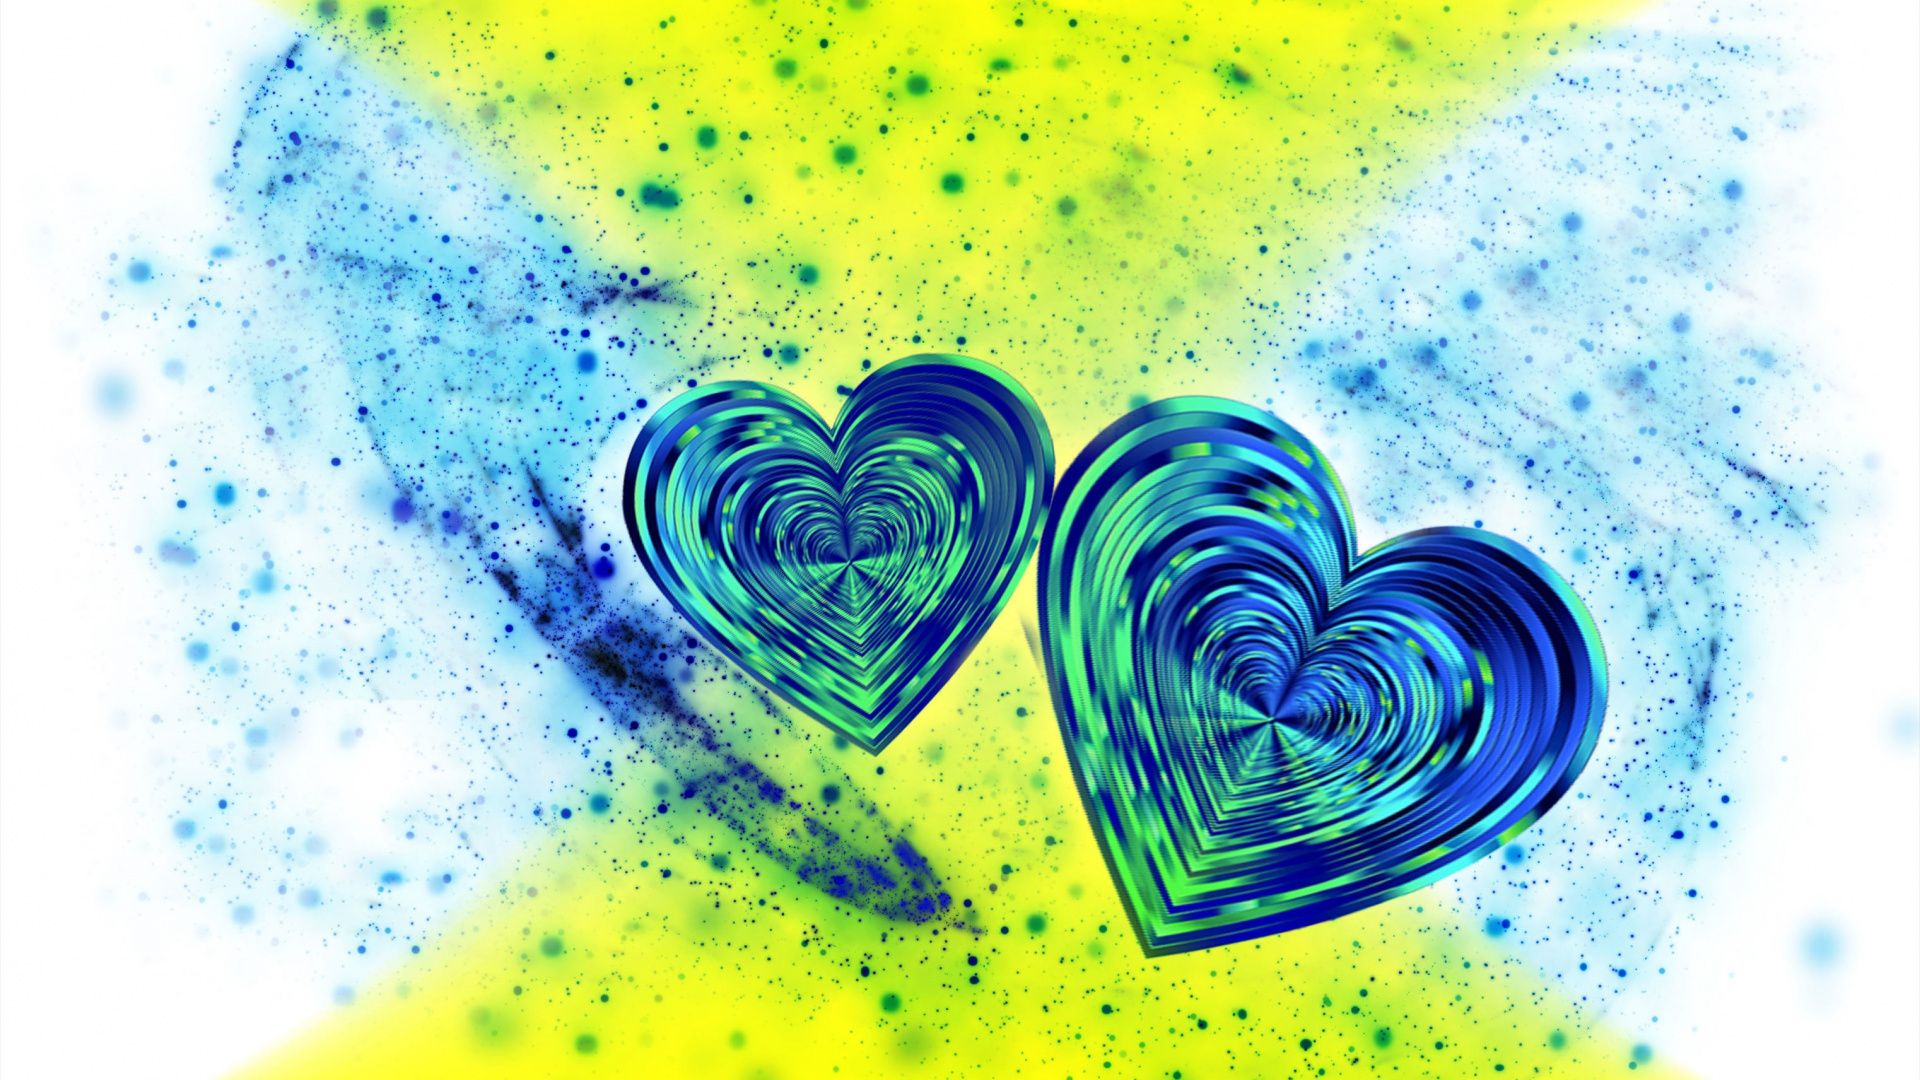 Abstract Art, Heart, Love, Graphic Design, Graphics. Wallpaper in 1920x1080 Resolution